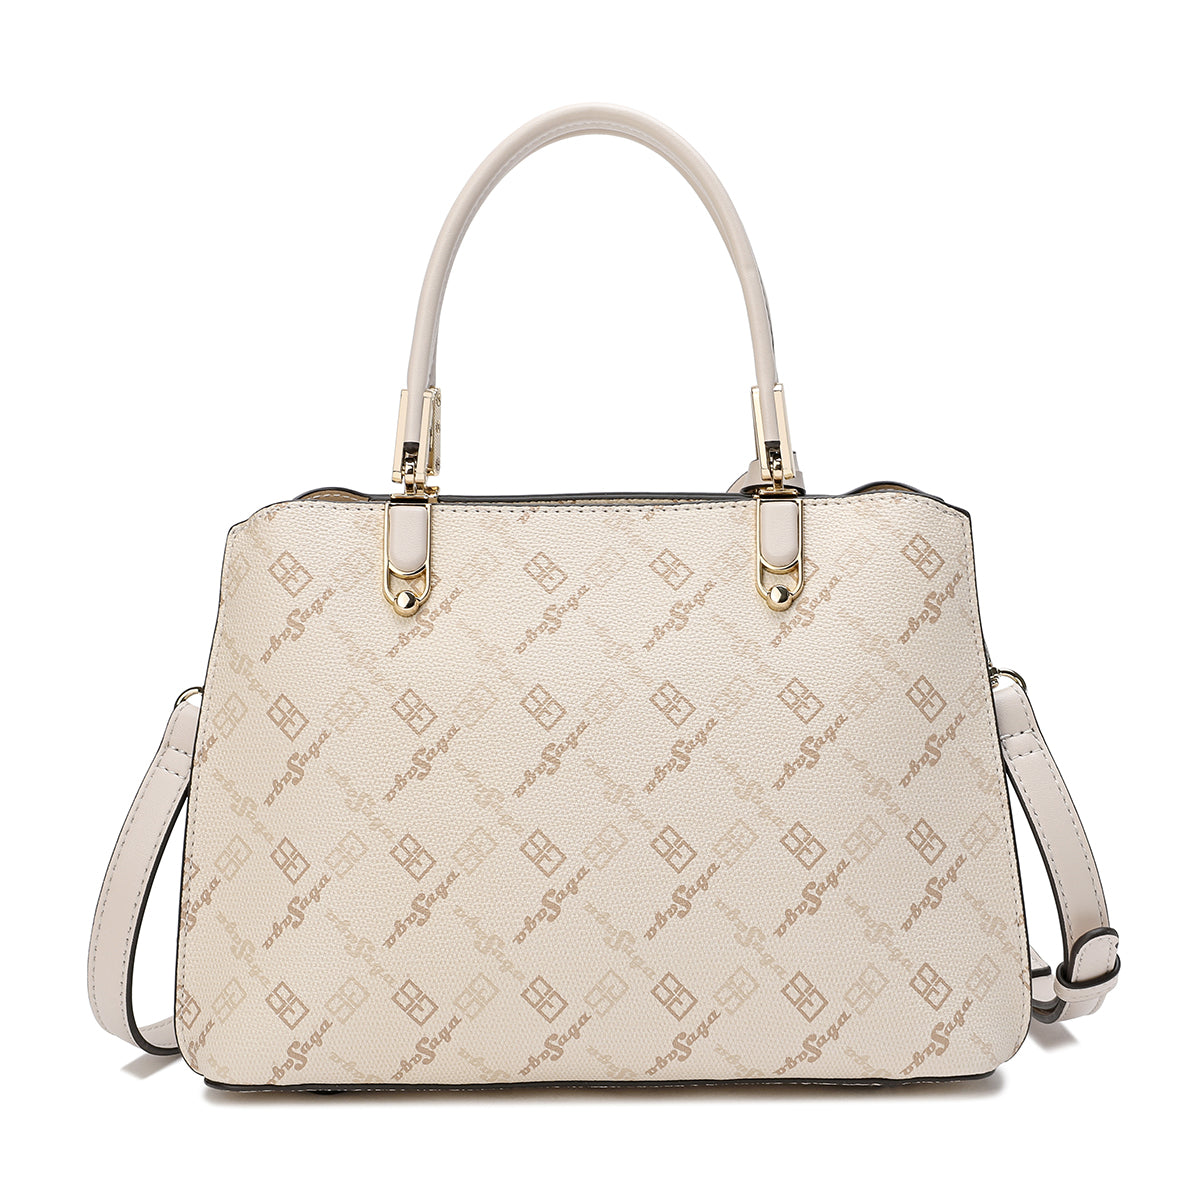 An elegant, spacious bag, 31 cm wide, with a long shoulder strap, brown or cream color